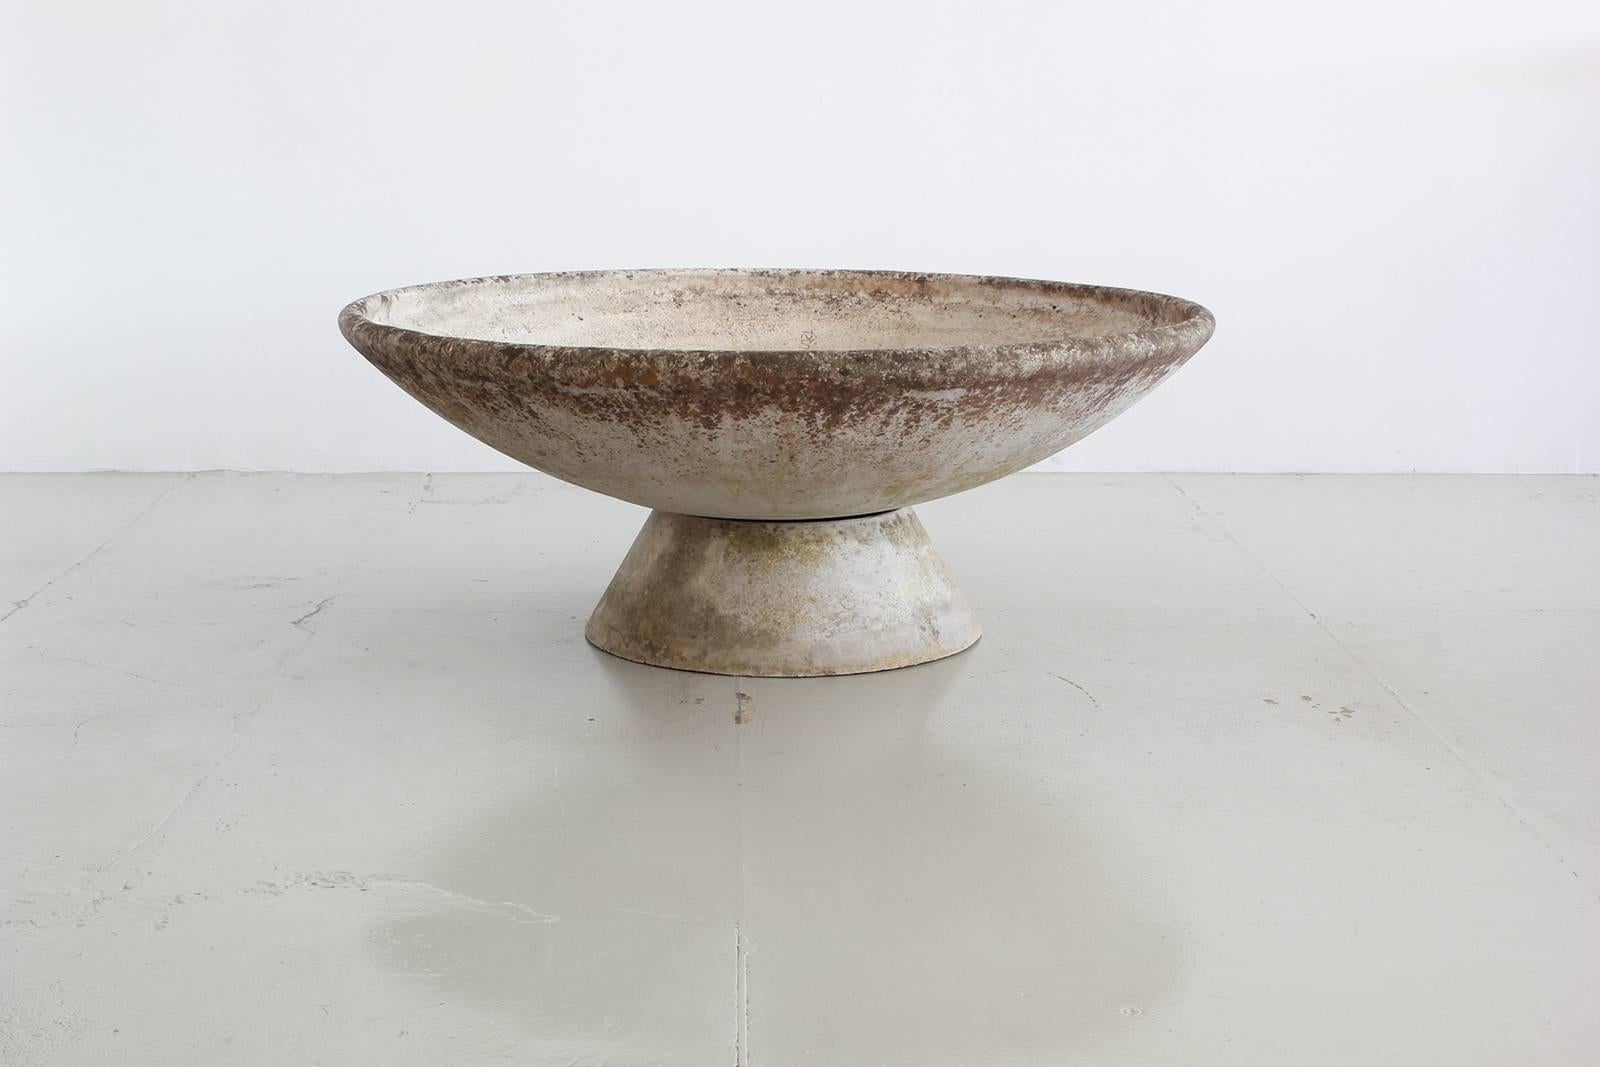 Extra large concrete bowl by Swiss architect Willy Guhl for Eternit.
Gorgeous patina.